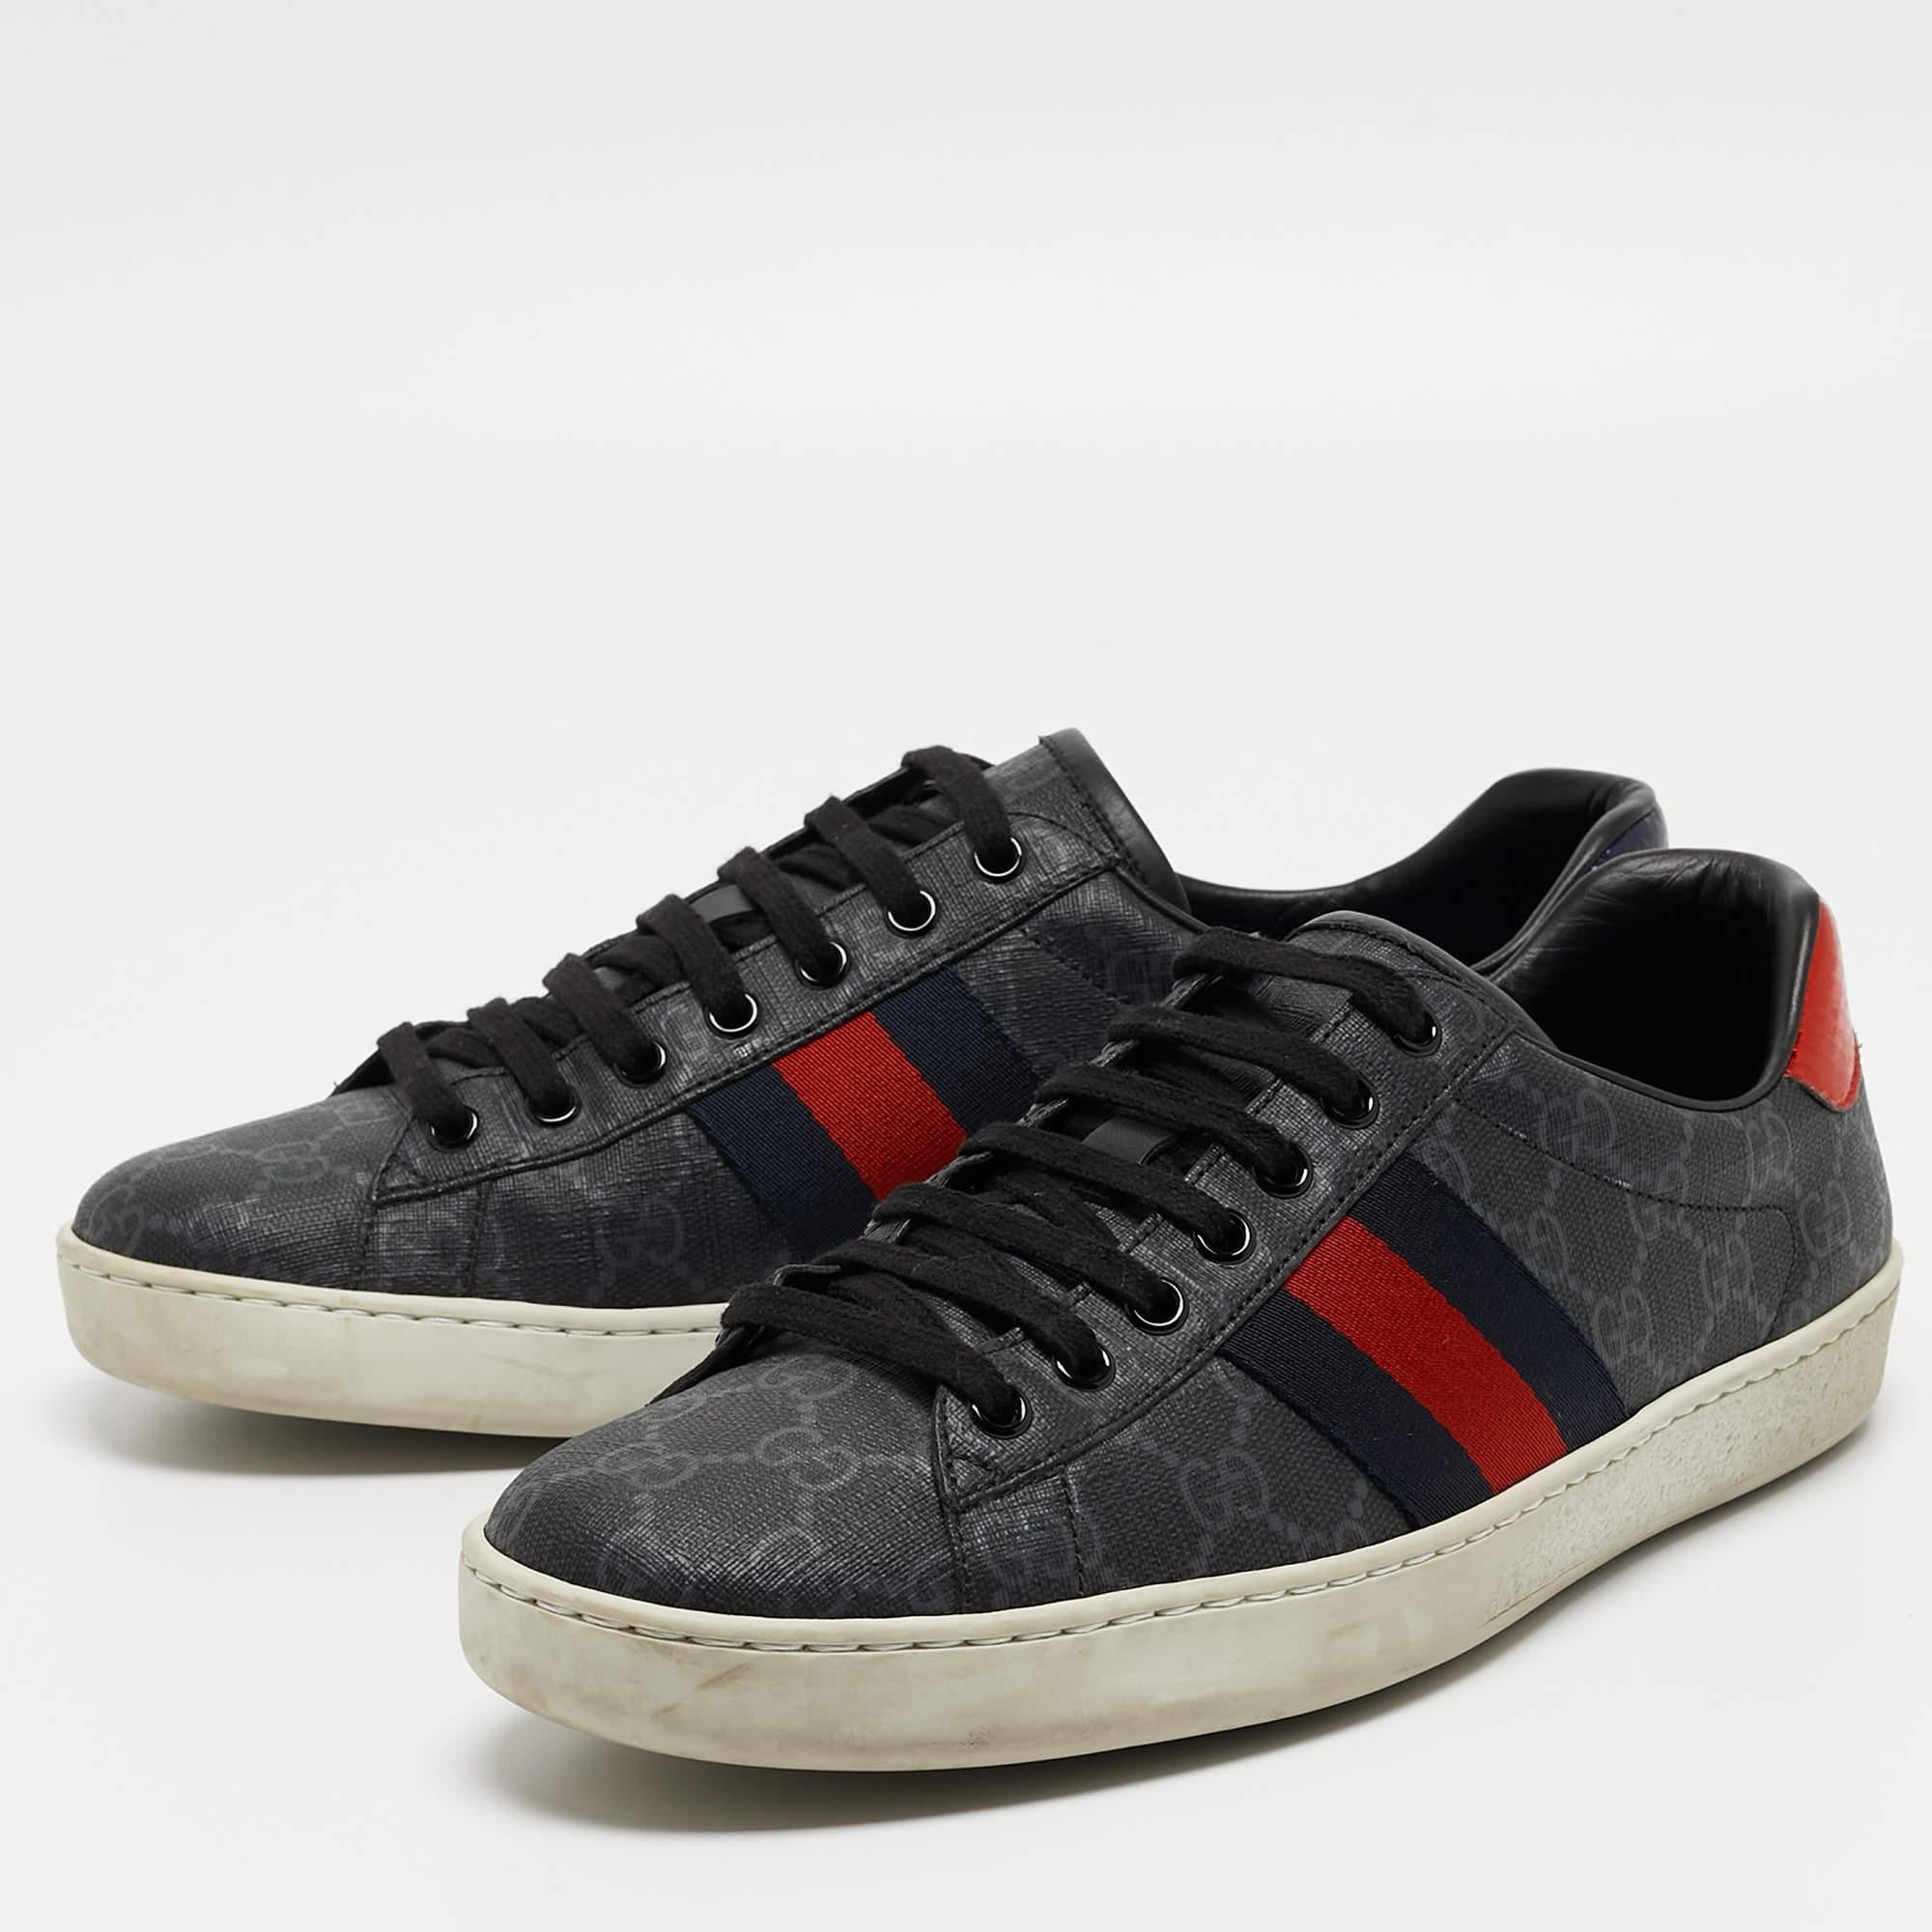 These Ace sneakers are designed to let your feet experience unmatched comfort with never-ending style and luxury. Made by the House of Gucci, these shoes feature GG Supreme canvas on the exterior and the iconic Web strap decorating the vamps. These